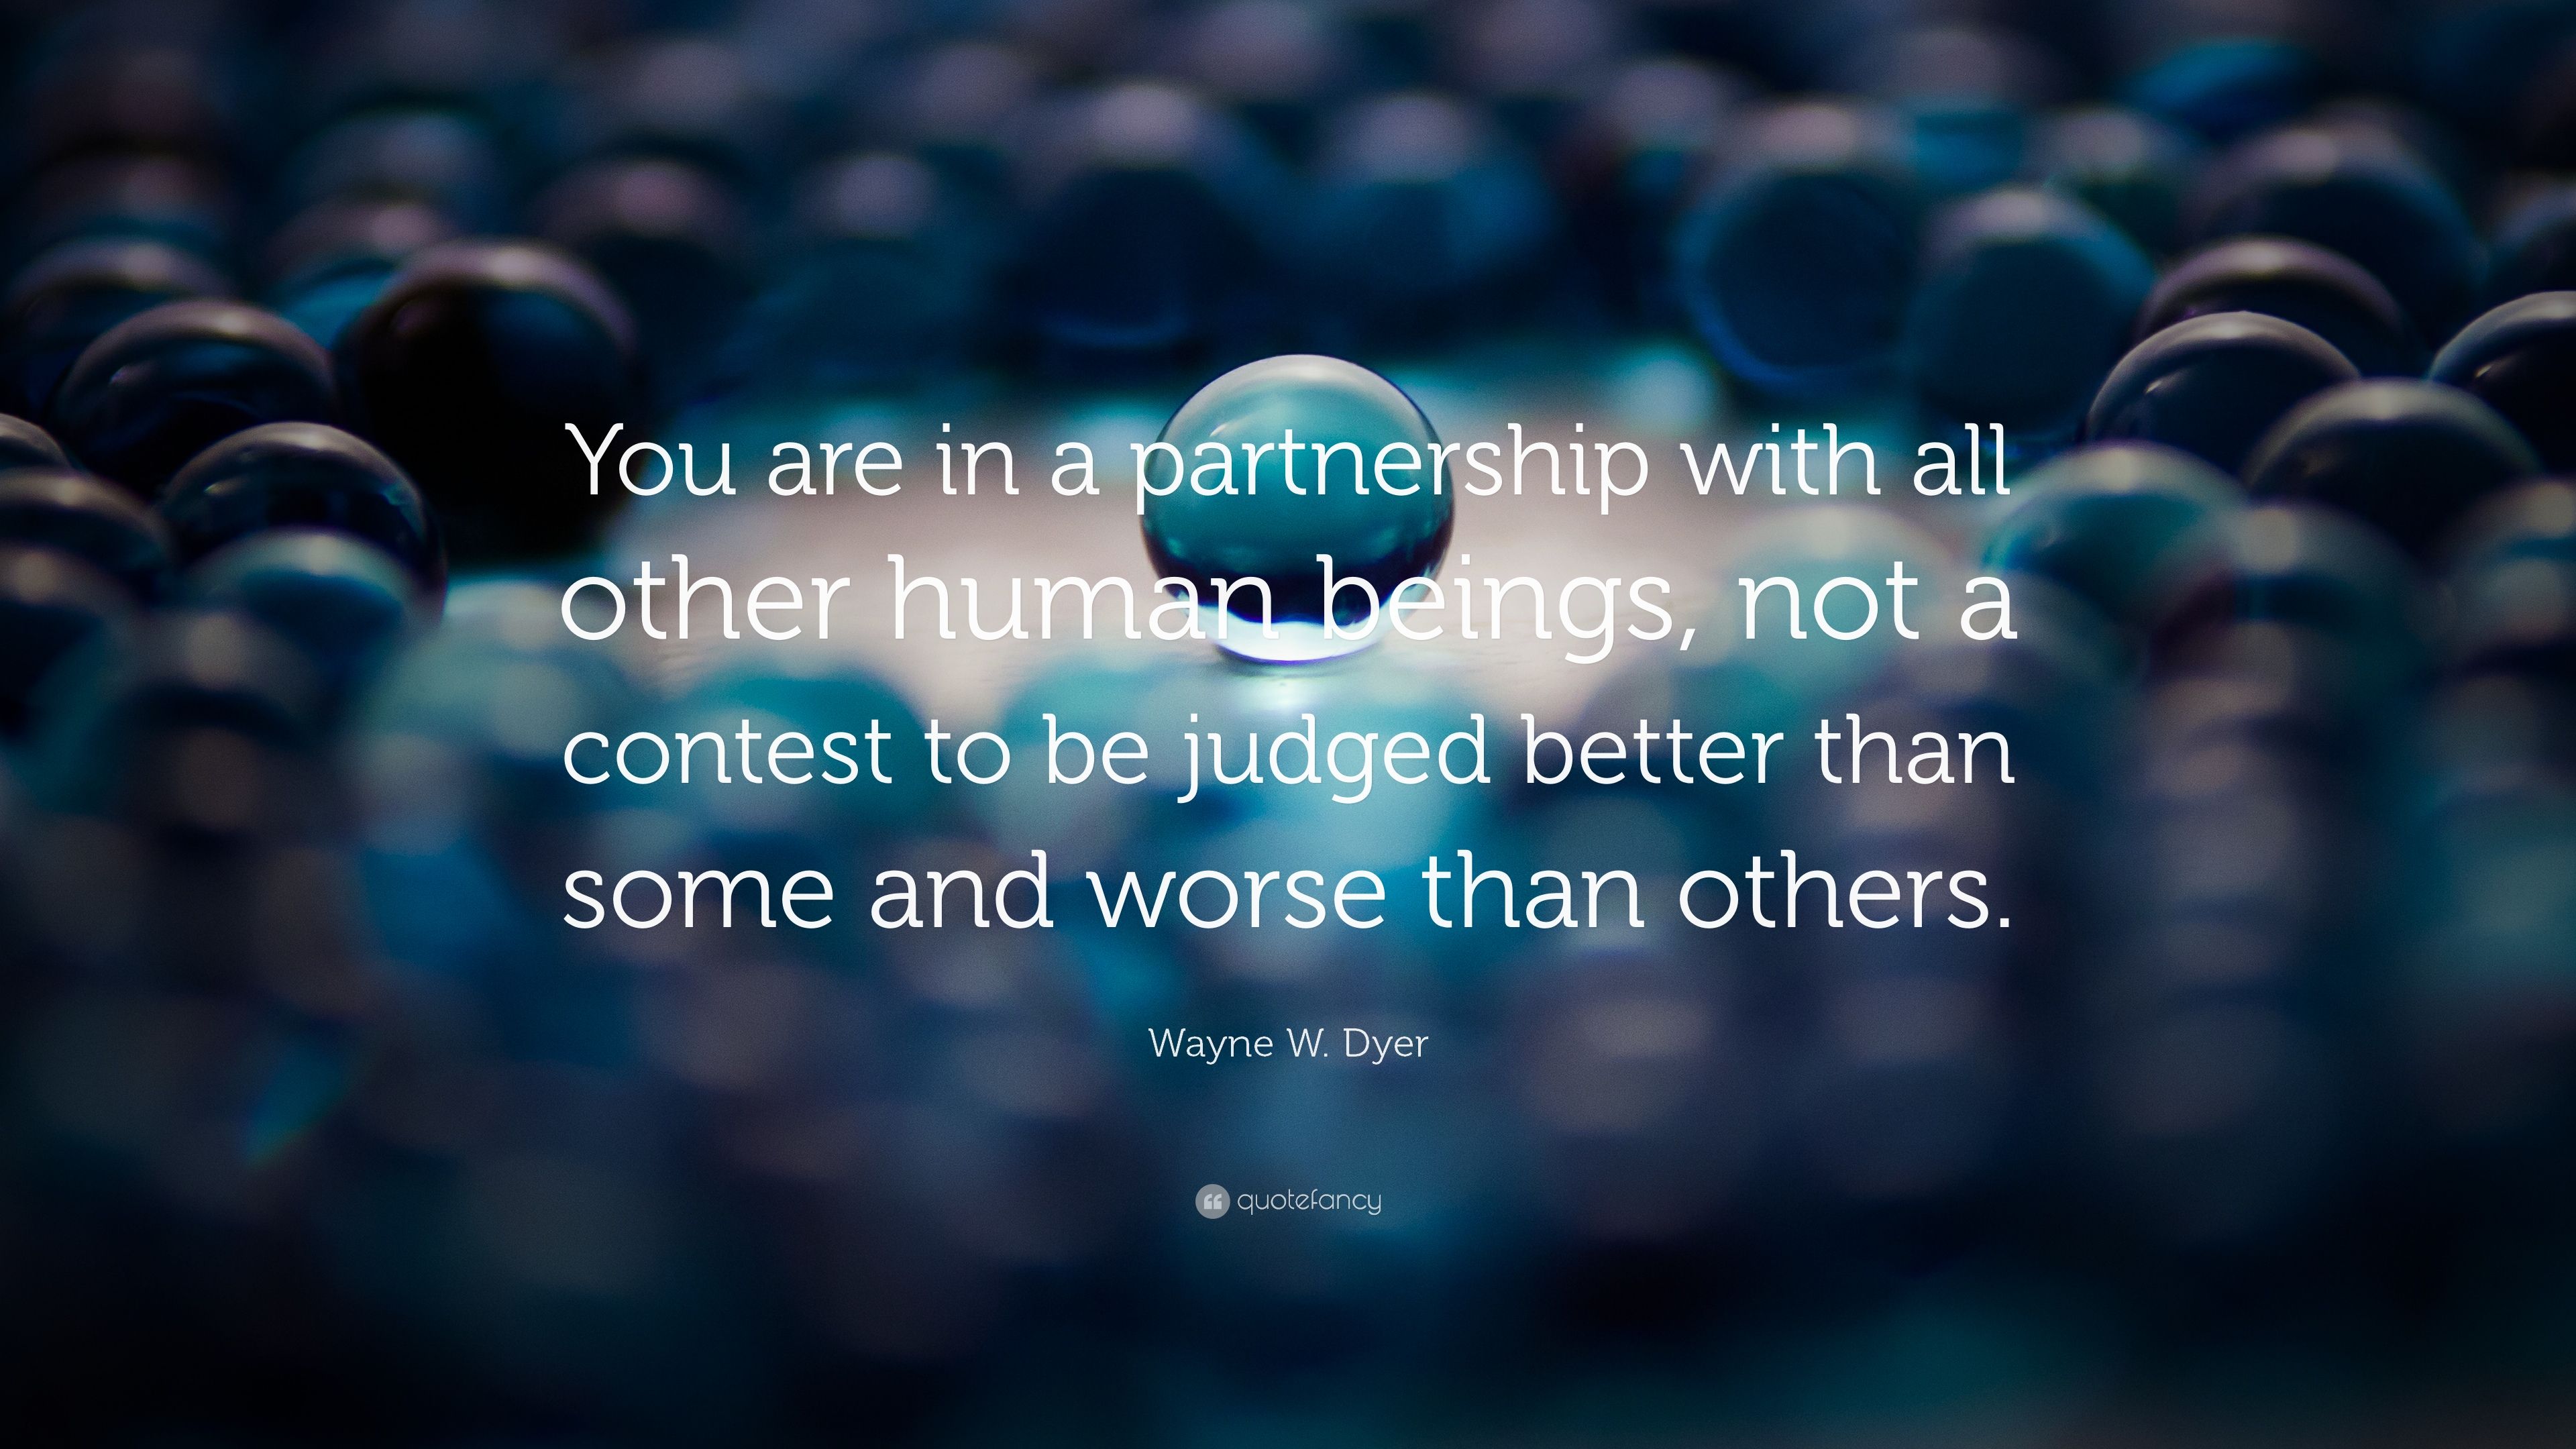 Wayne W. Dyer Quote: “You are in a partnership with all other human beings, not a contest to be judged better than some and worse than others.” (16 wallpaper)